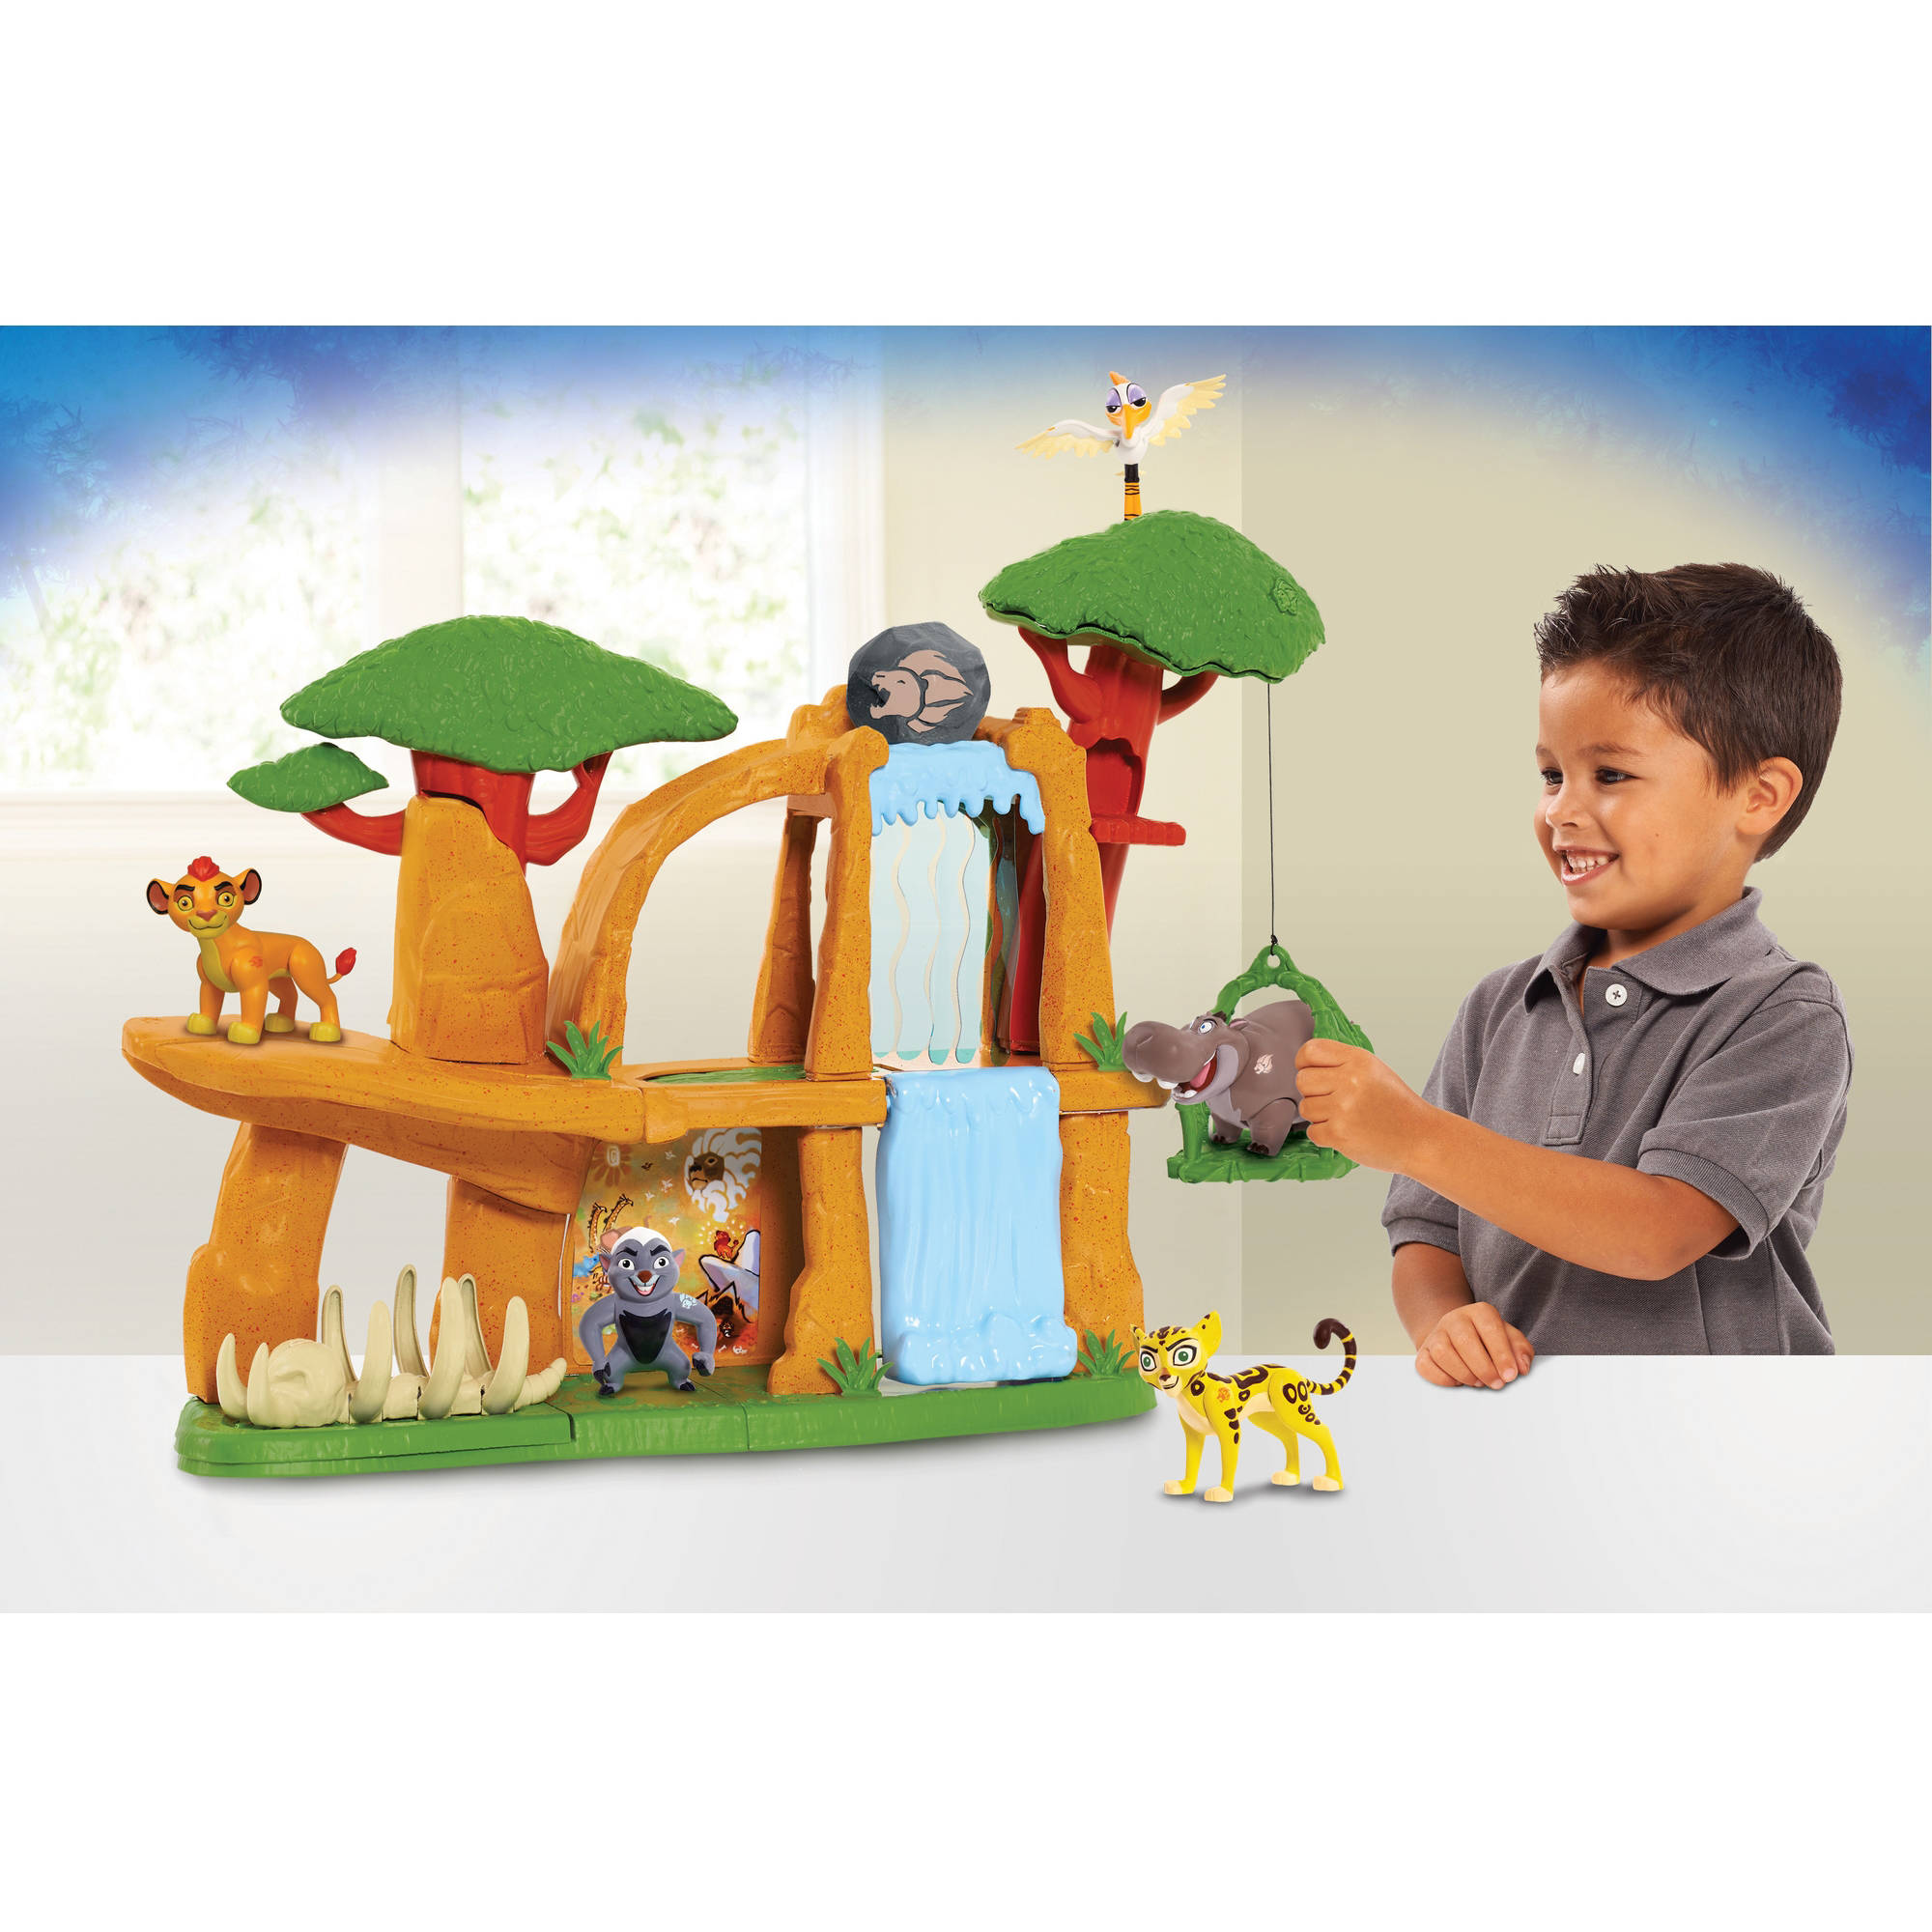 Lion Guard Battle for the Pride Lands Playset - image 1 of 2